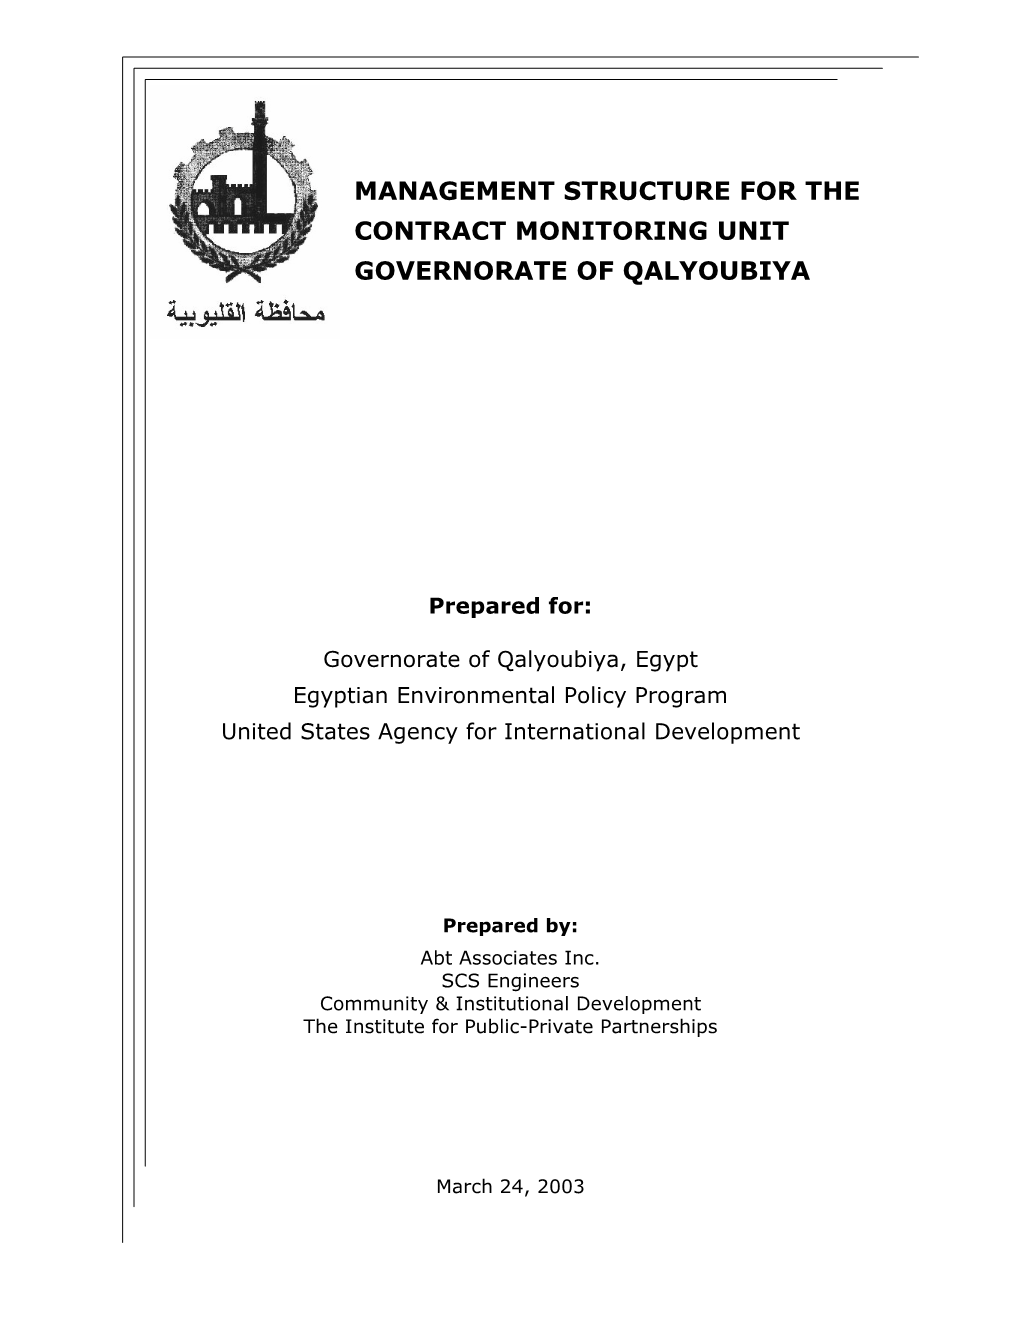 Management Structure for the Contract Monitoring Unit Governorate of Qalyoubiya